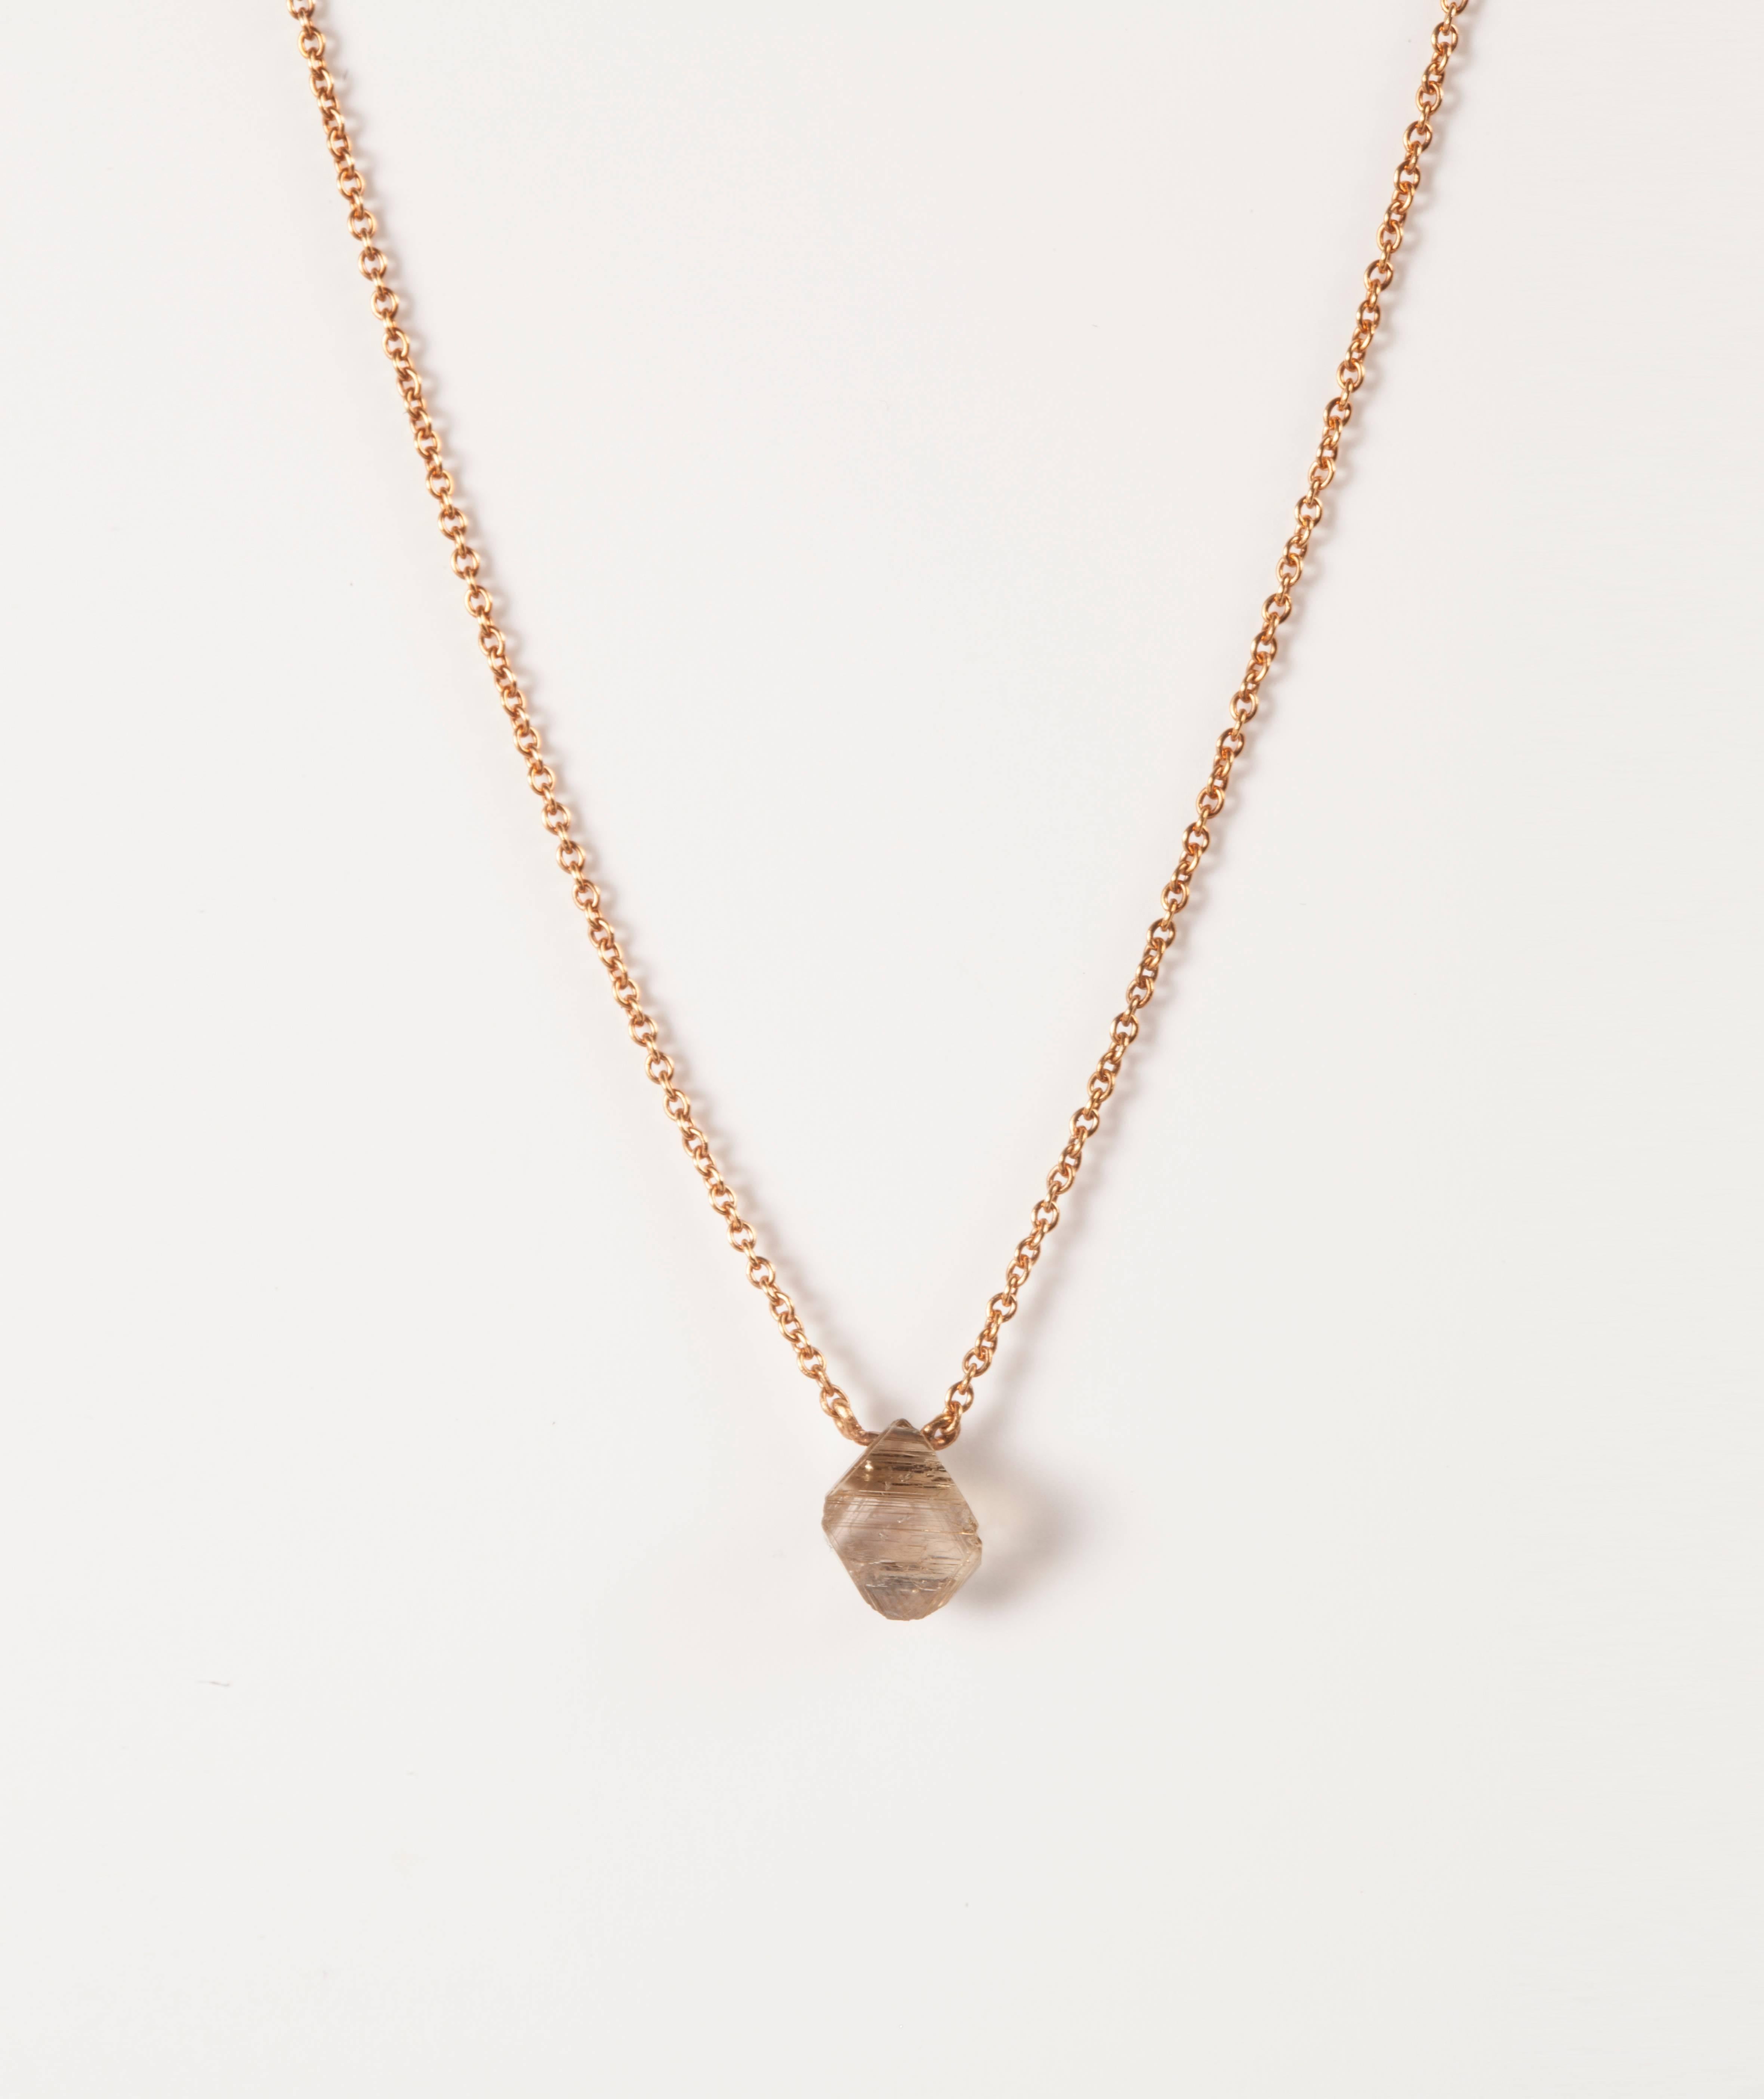 1.24 ct. Natural Light Brown Octahedron Rough diamond in 18K handcrafted rose gold necklace.

The necklace is 43,5 cm. but can be adjusted to fit. 

Origin of diamond: Australia

Every rough diamond from Roughdiamonds dk has been personally